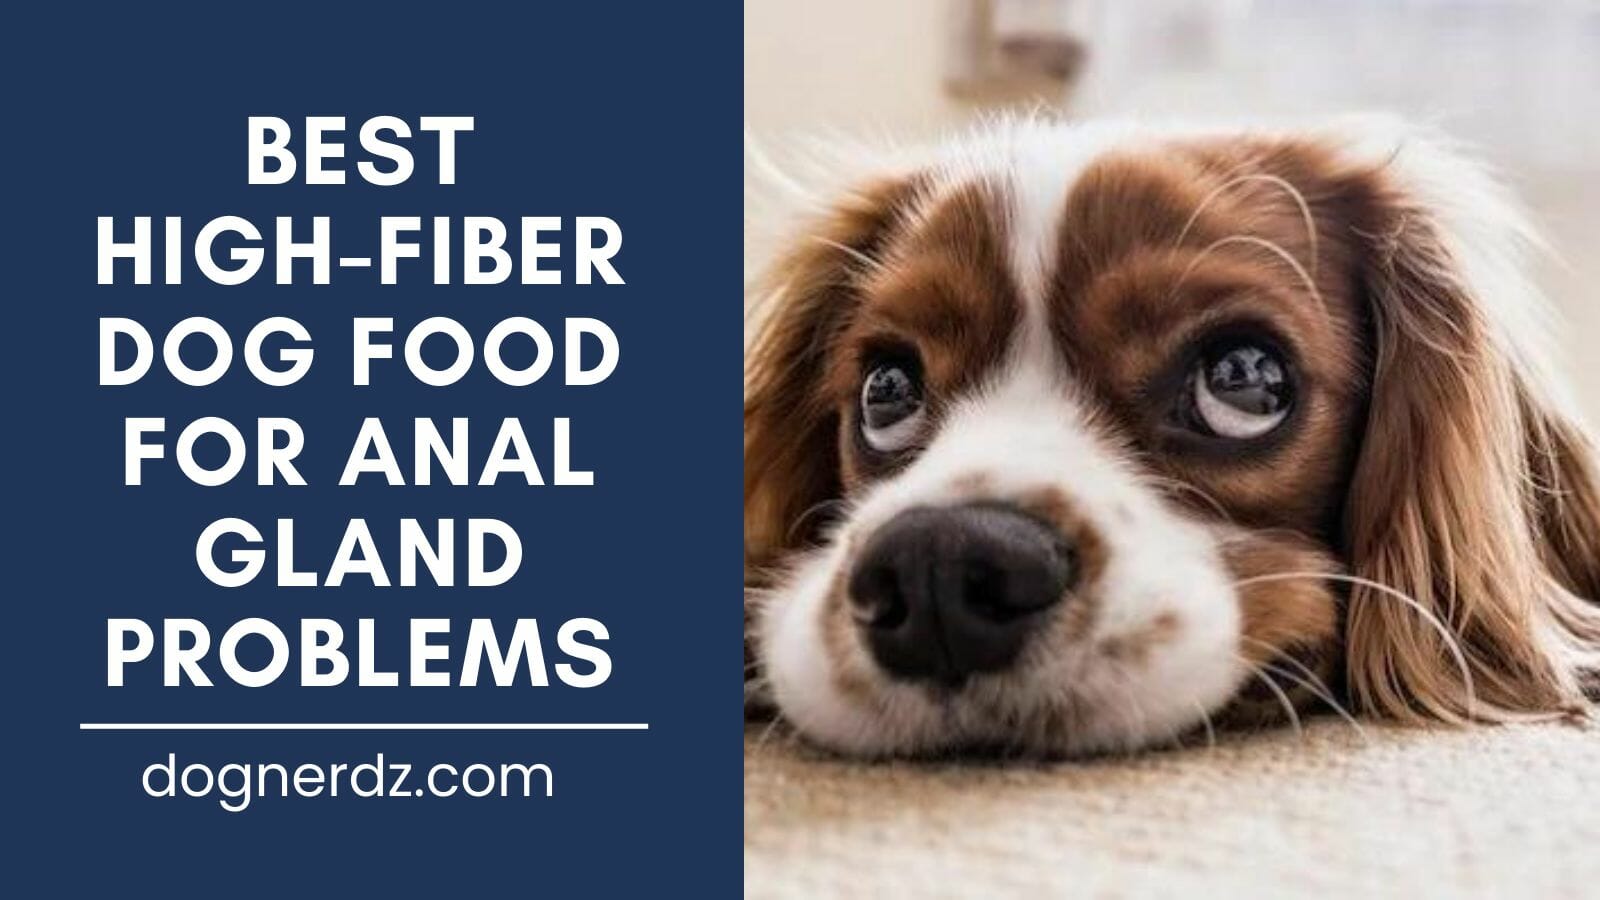 review of best high fiber dog foods for anal gland problems